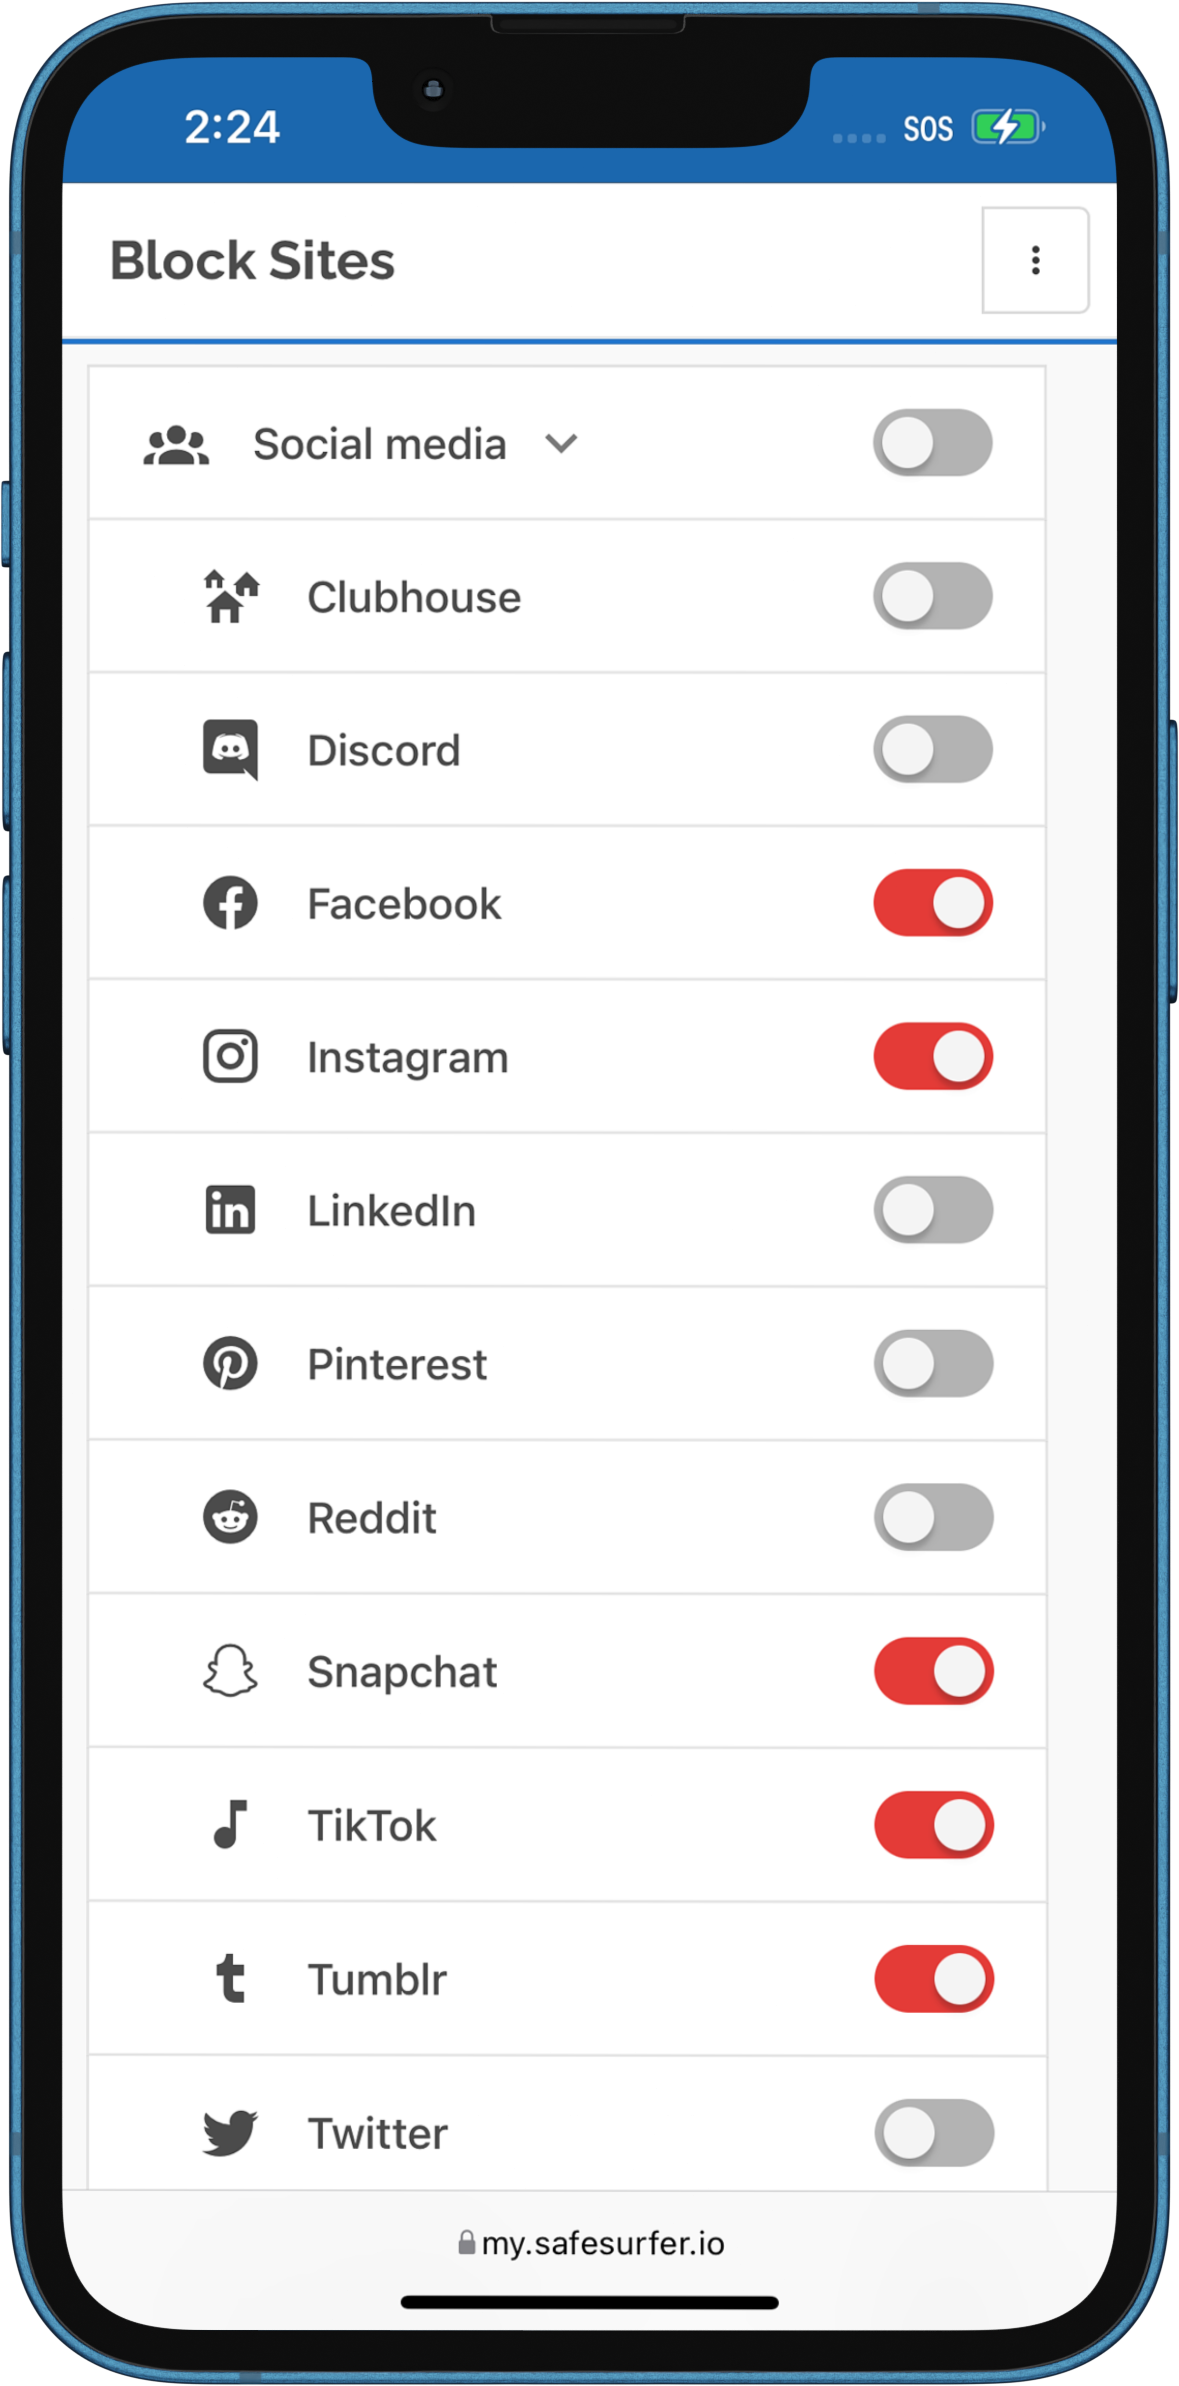 iPhone showing Safe Surfer block sites user interface, with toggles for Social Media, Clubhouse, Discord, Facebook, Instagram, LinkedIn, Pinterest, Reddit, Snapchat, TikTok, Tumblr, and Twitter.